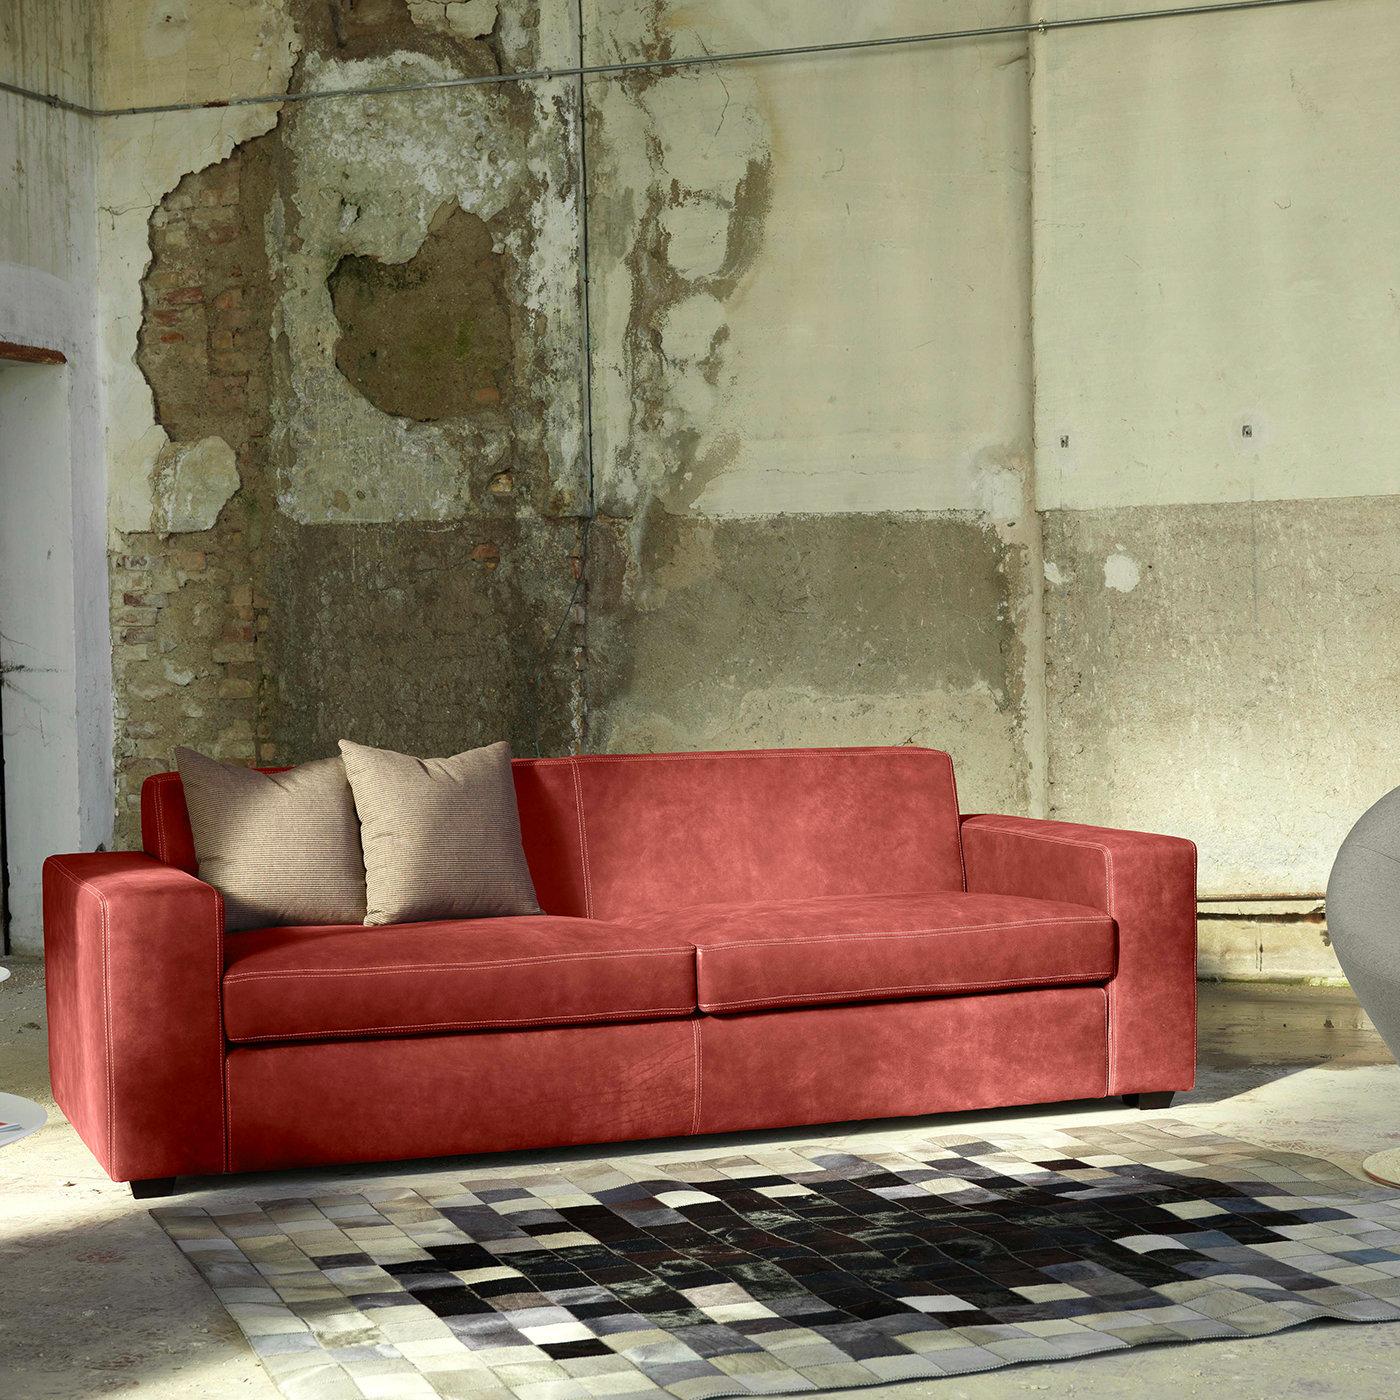 The perfect mix of pleasing aesthetics and comfort, this refined sofa flaunts a classic silhouette upholstered in brick red Dacron fabric with tone-on-tone stitching. Adding comfort to the wide seat, back, and generous track armrests, the